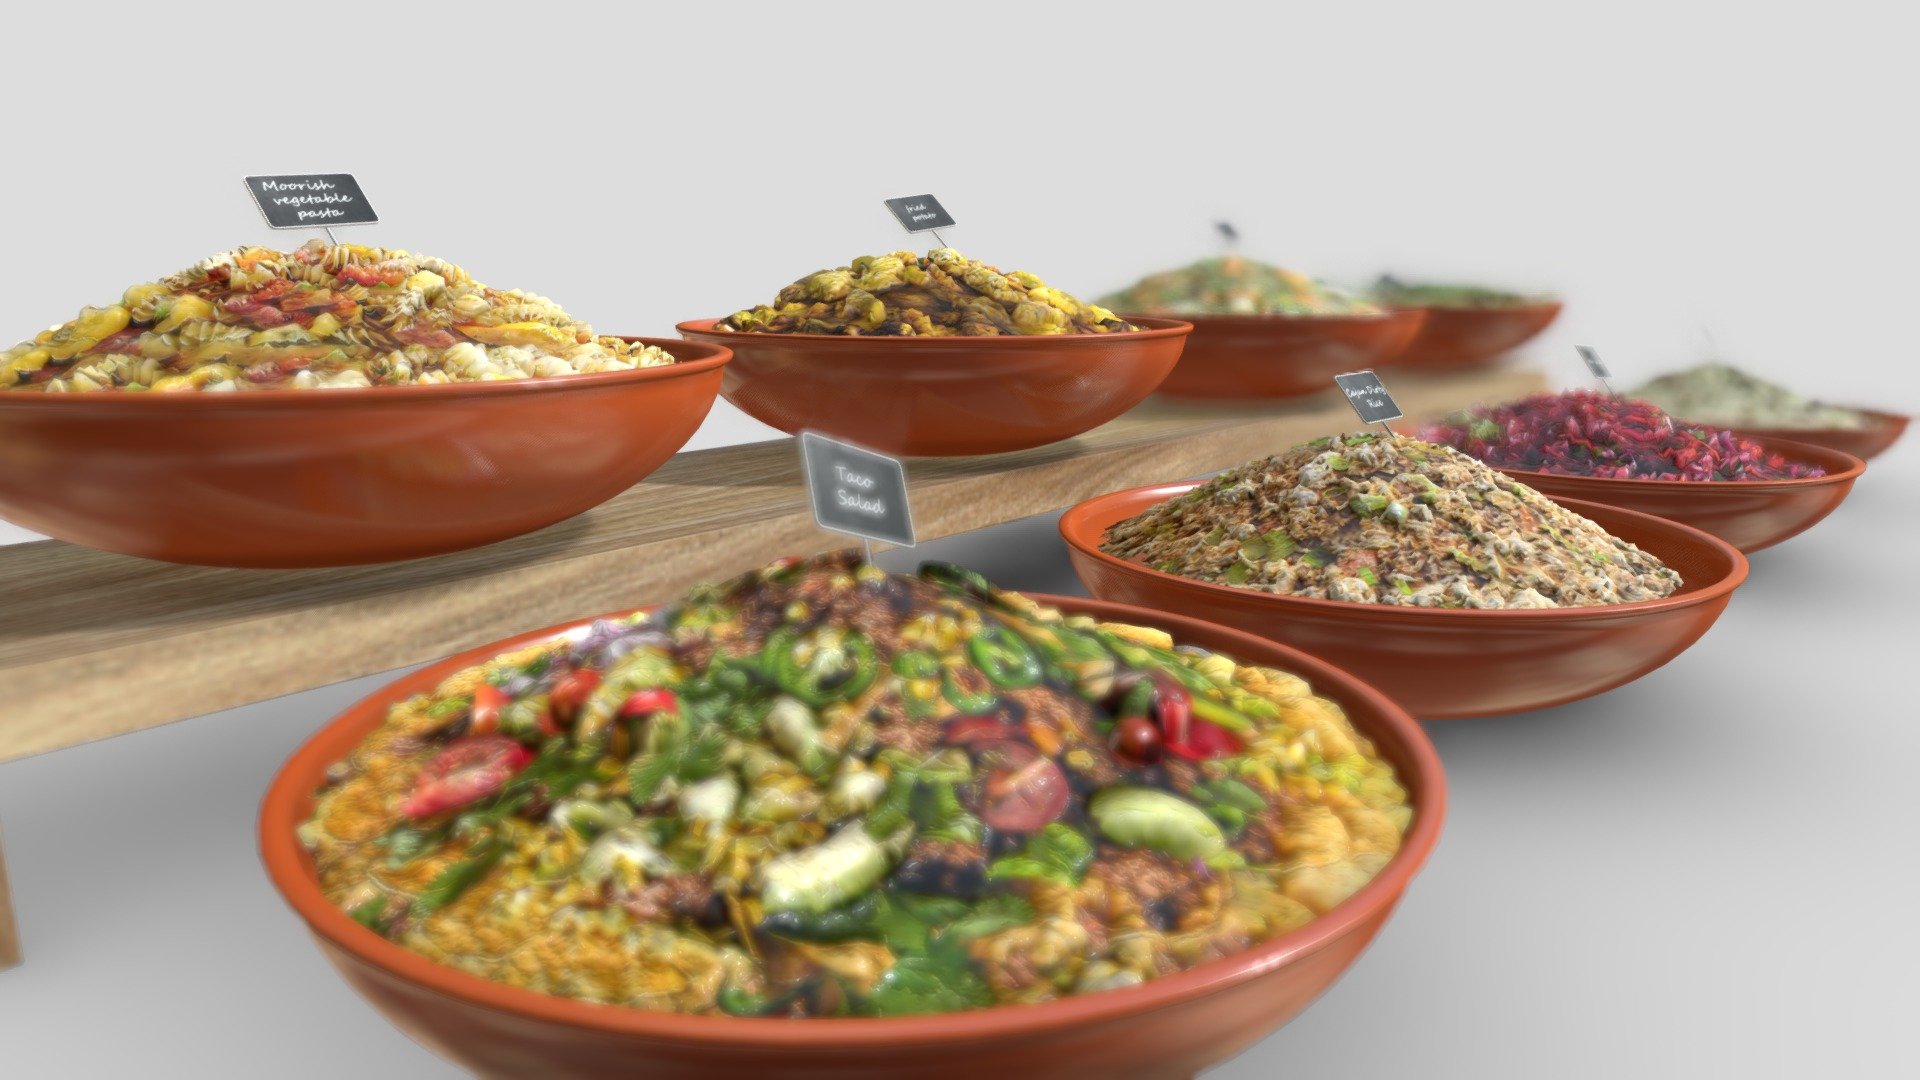 A display of varied salads to put in a salad bar, in a restaurant, in self-service food in hotel or reception renderings.
this model includes eight food trays:
- Beet salad.
- Cajun Dirty Rice Salad
- Fried potatoes
- Lettuce salad
- couscous
- Taco salad
- Salad macedoine
- Moorish vegetable pasta 3d model